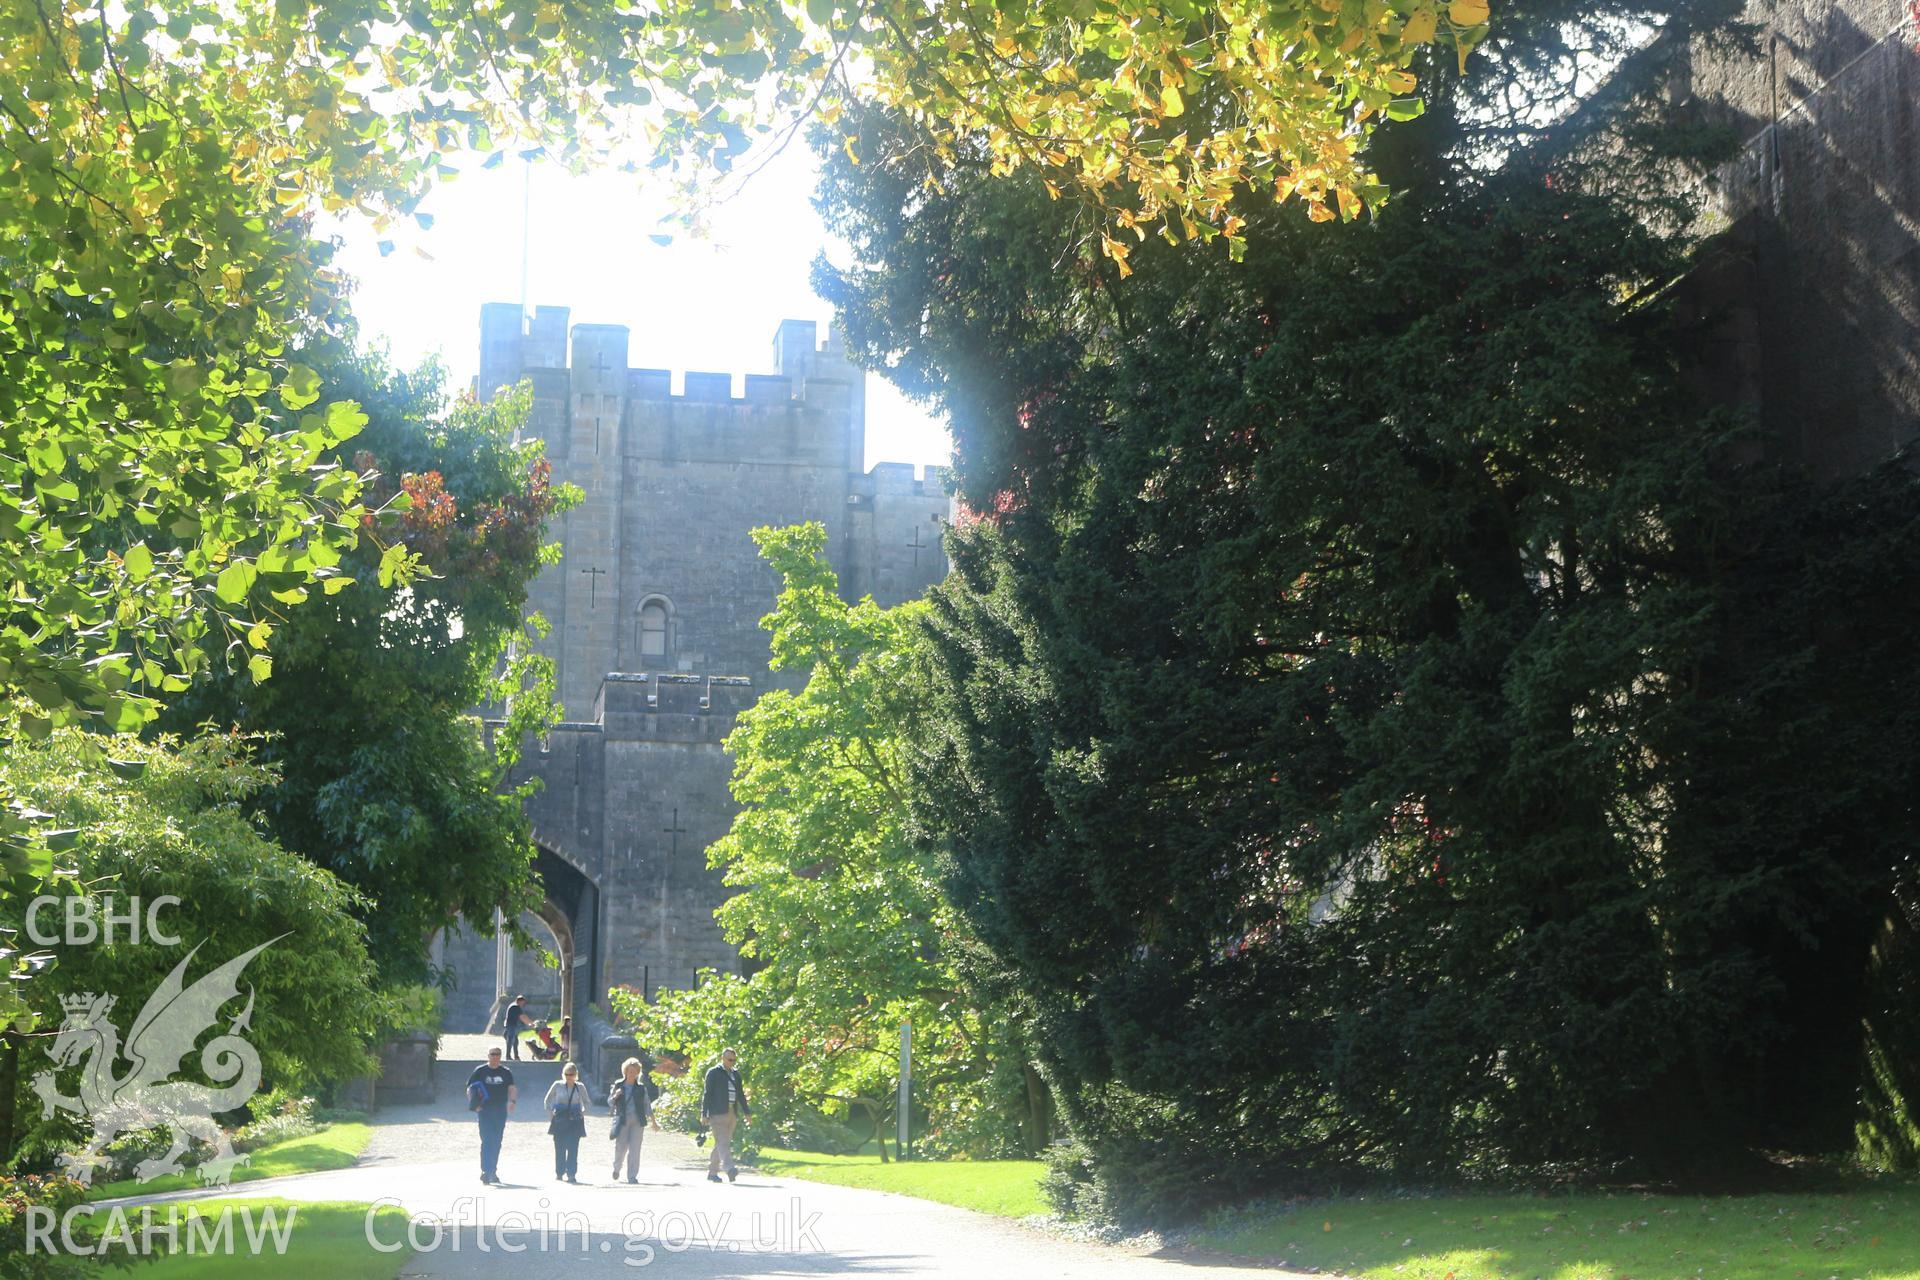 Photographic survey of Penrhyn Castle, Bangor. East front, looking towards the porch and side gate.